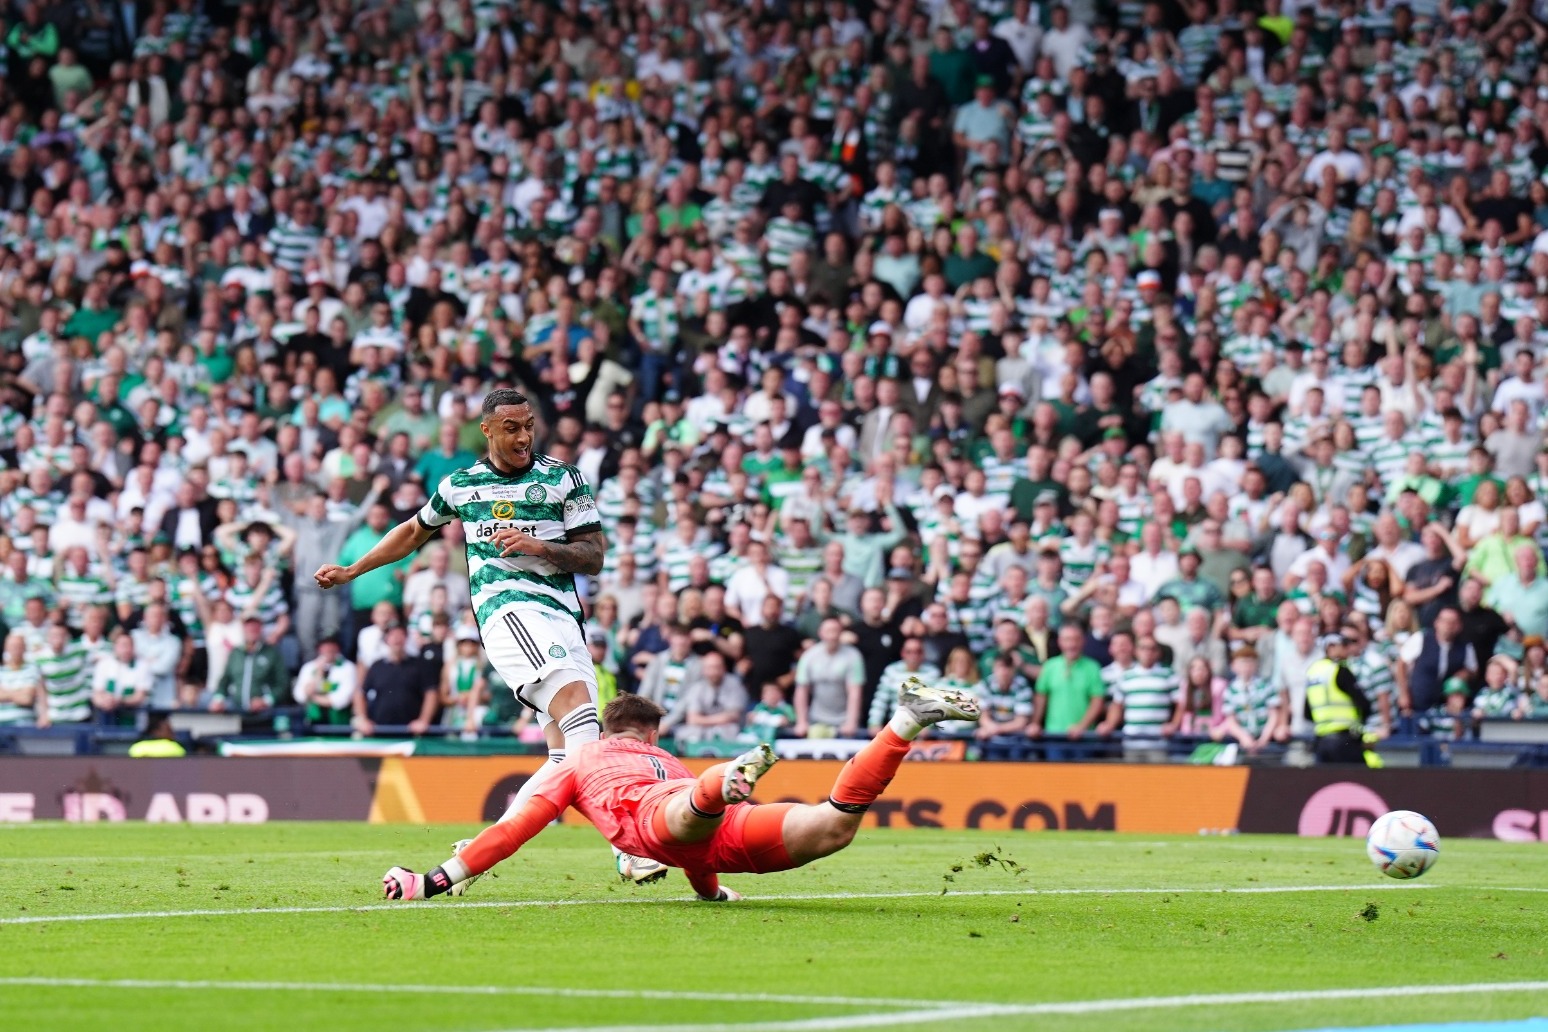 Celtic beat Rangers in Scottish Cup final 